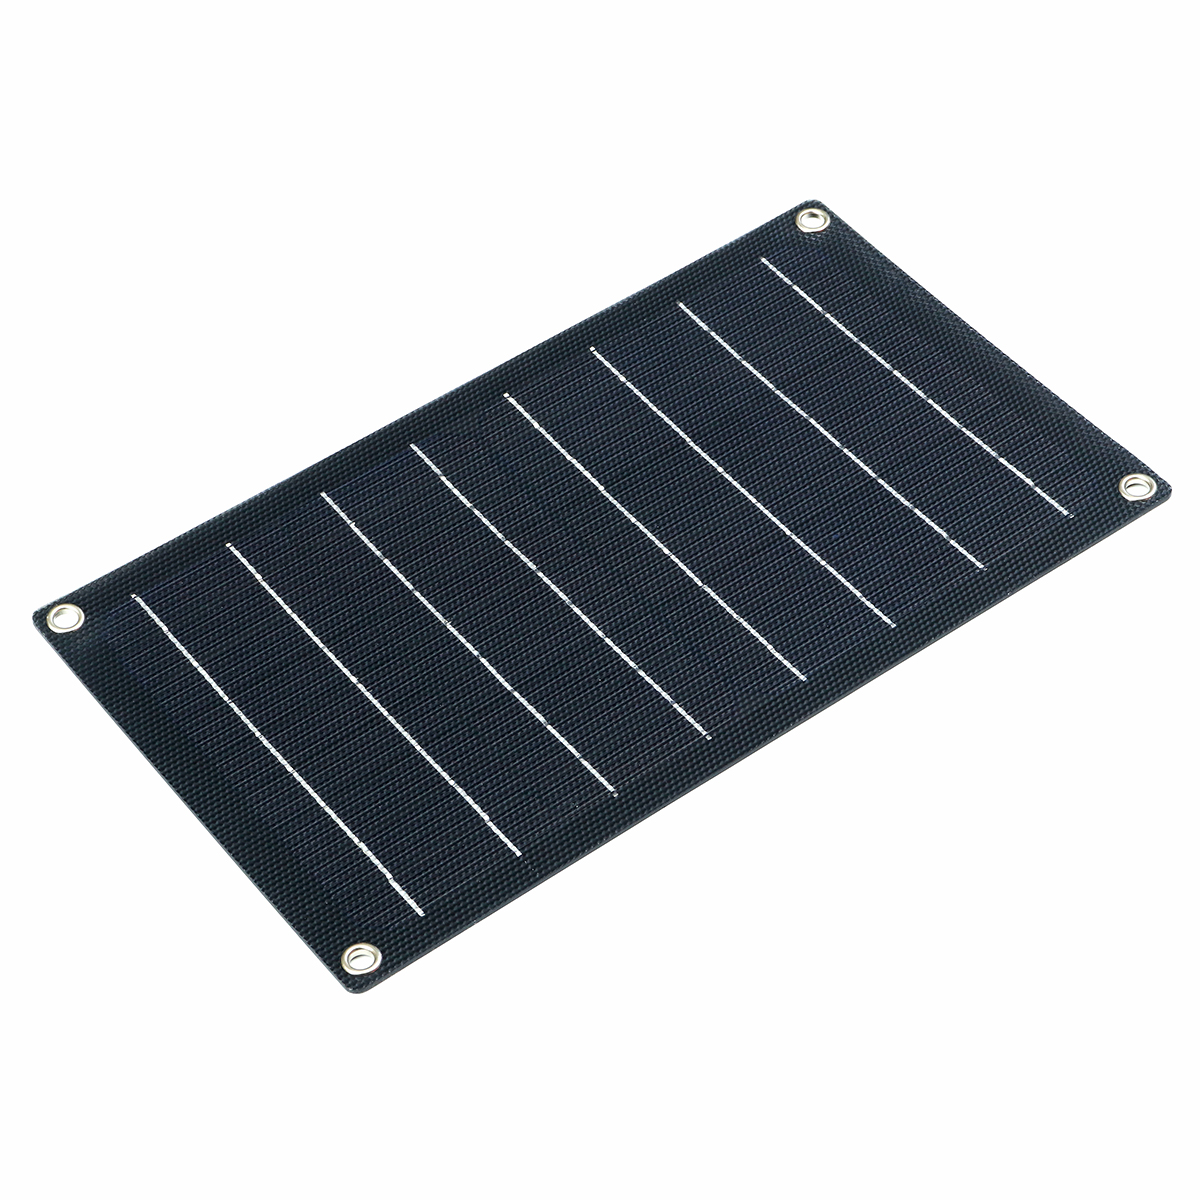 10W-Waterproof-Solar-Panel-Matte-Texture-Car-Emergency-Charger-WIth-4-Protective-Corners-USBDC-1614330-9